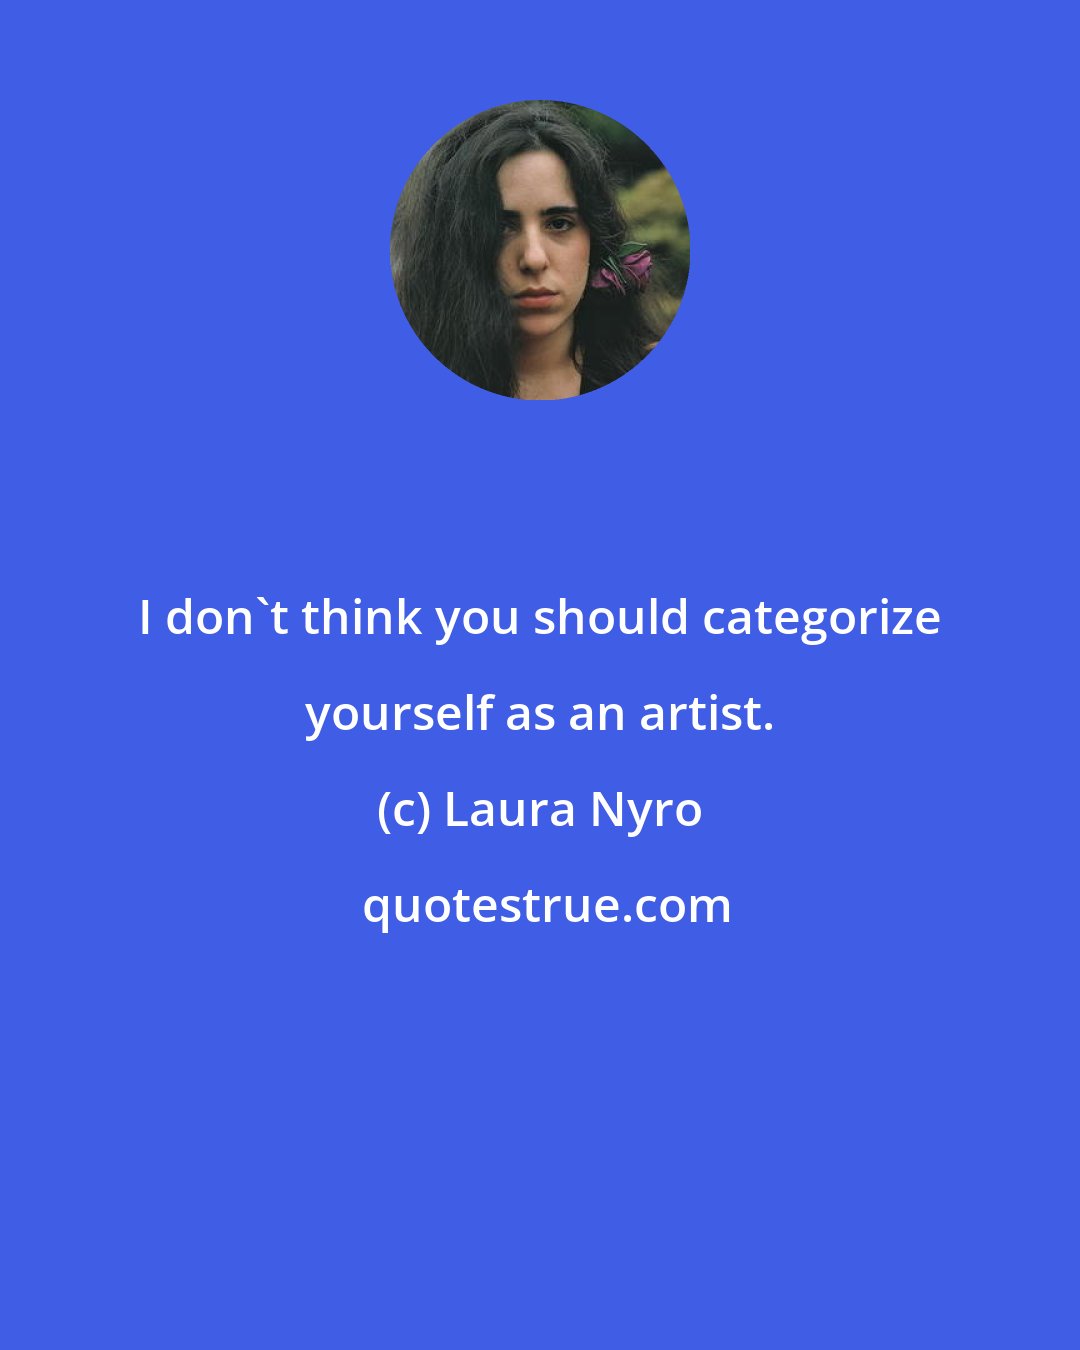 Laura Nyro: I don't think you should categorize yourself as an artist.